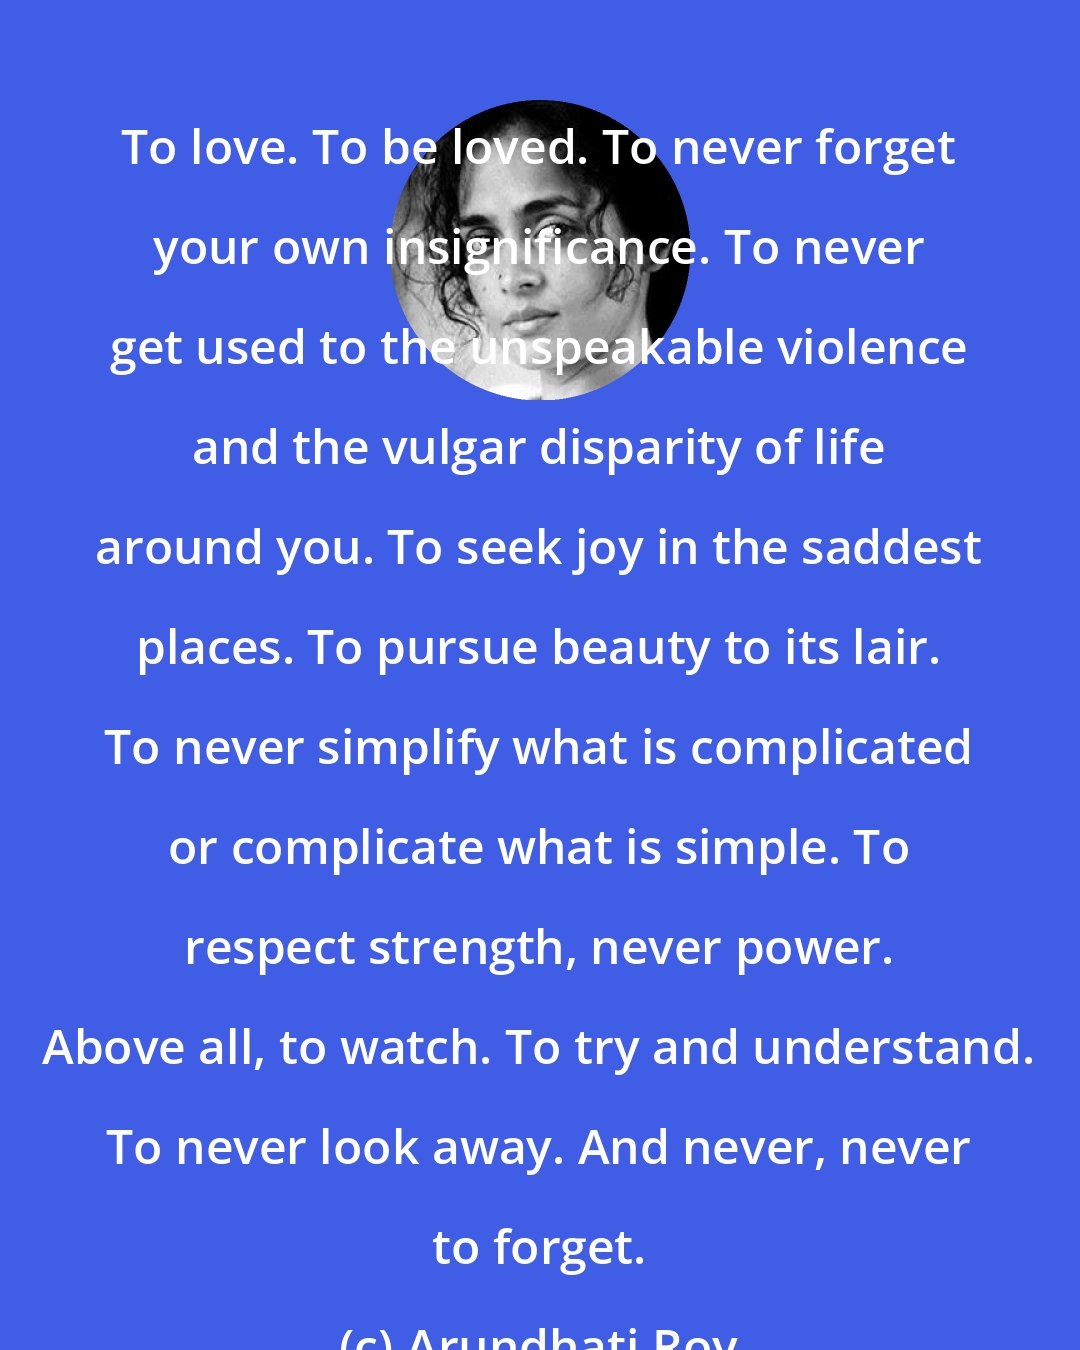 Arundhati Roy: To love. To be loved. To never forget your own insignificance. To never get used to the unspeakable violence and the vulgar disparity of life around you. To seek joy in the saddest places. To pursue beauty to its lair. To never simplify what is complicated or complicate what is simple. To respect strength, never power. Above all, to watch. To try and understand. To never look away. And never, never to forget.